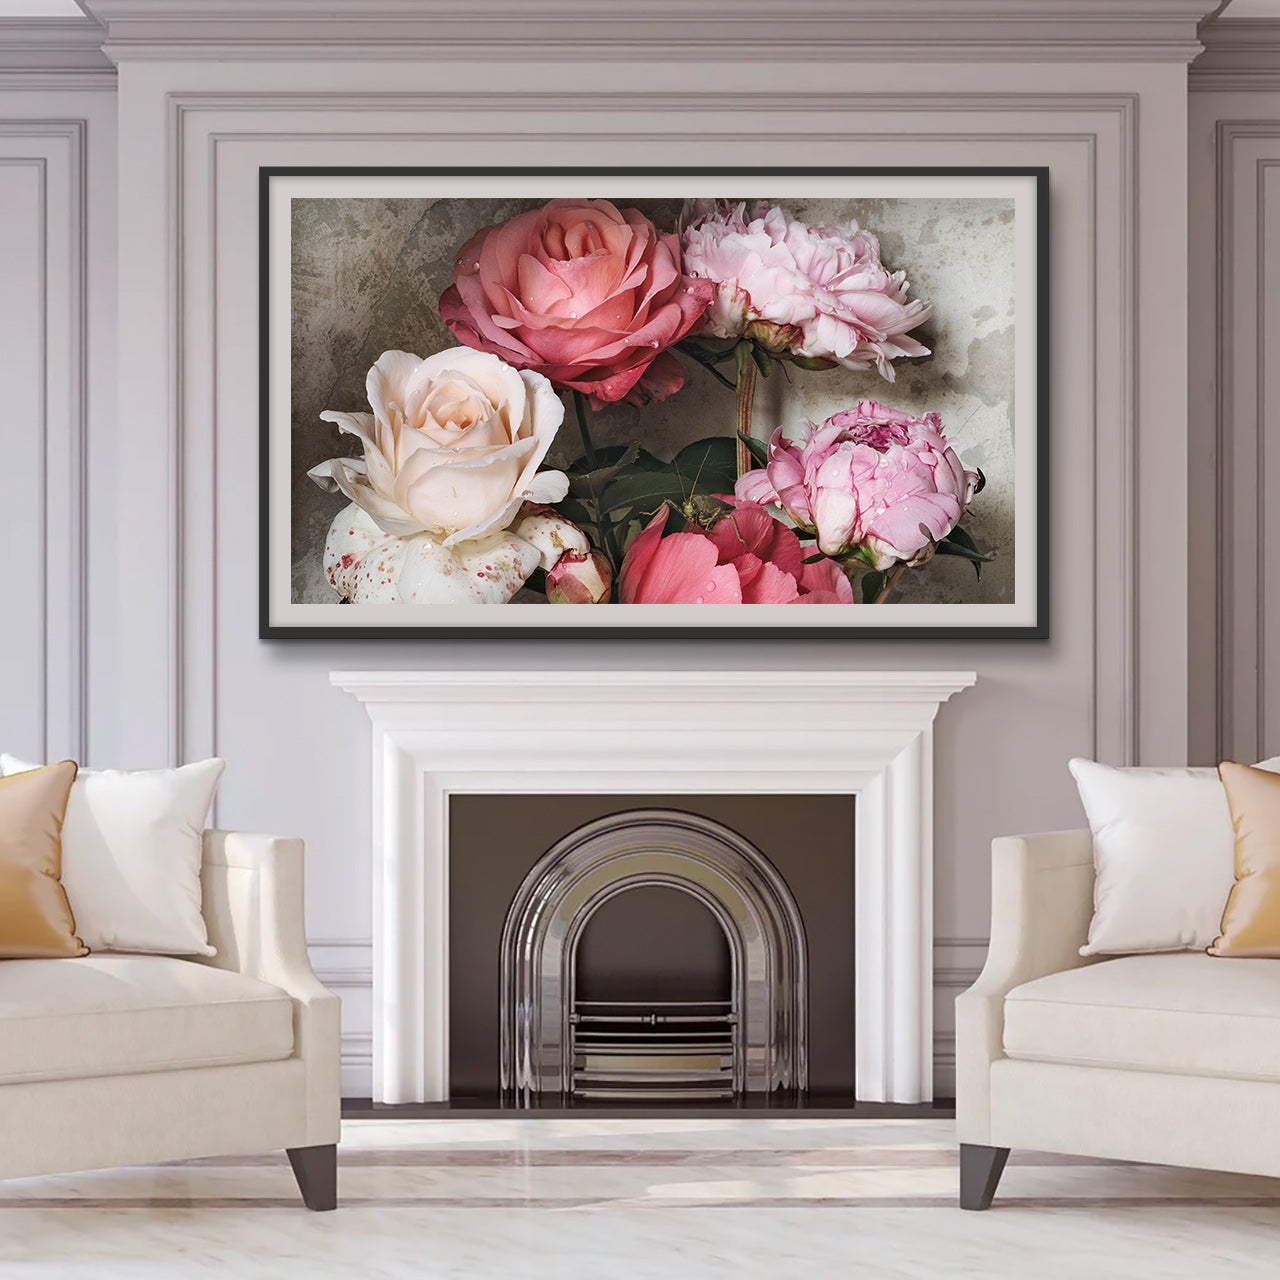 The Flowers of Provence • Pack of 25 • Art for Samsung The FRAME TV